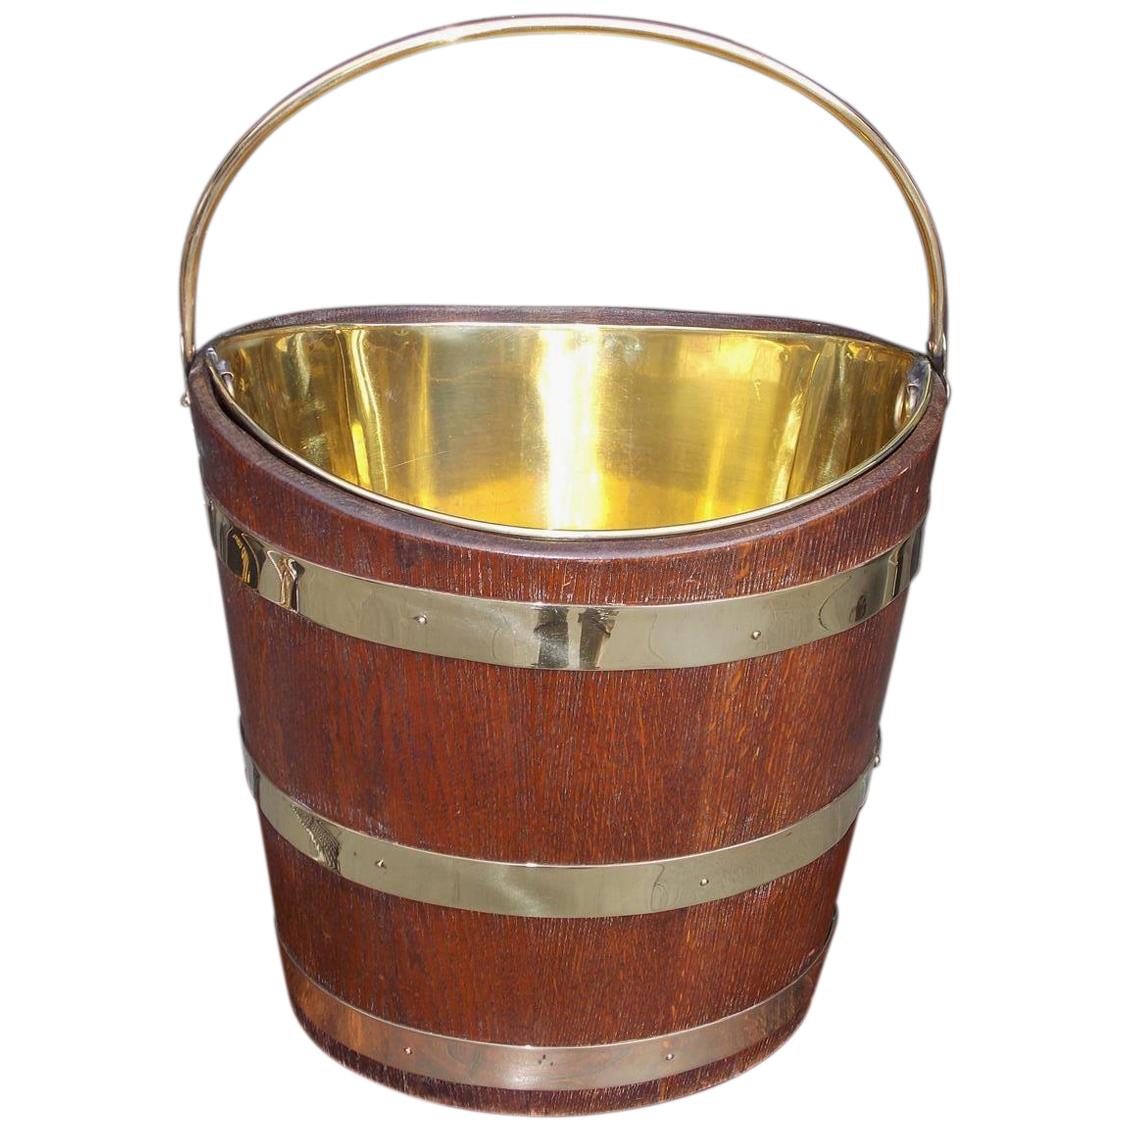 English Navette Form Oak Brass Banded and Lined Peat Bucket, Circa 1820